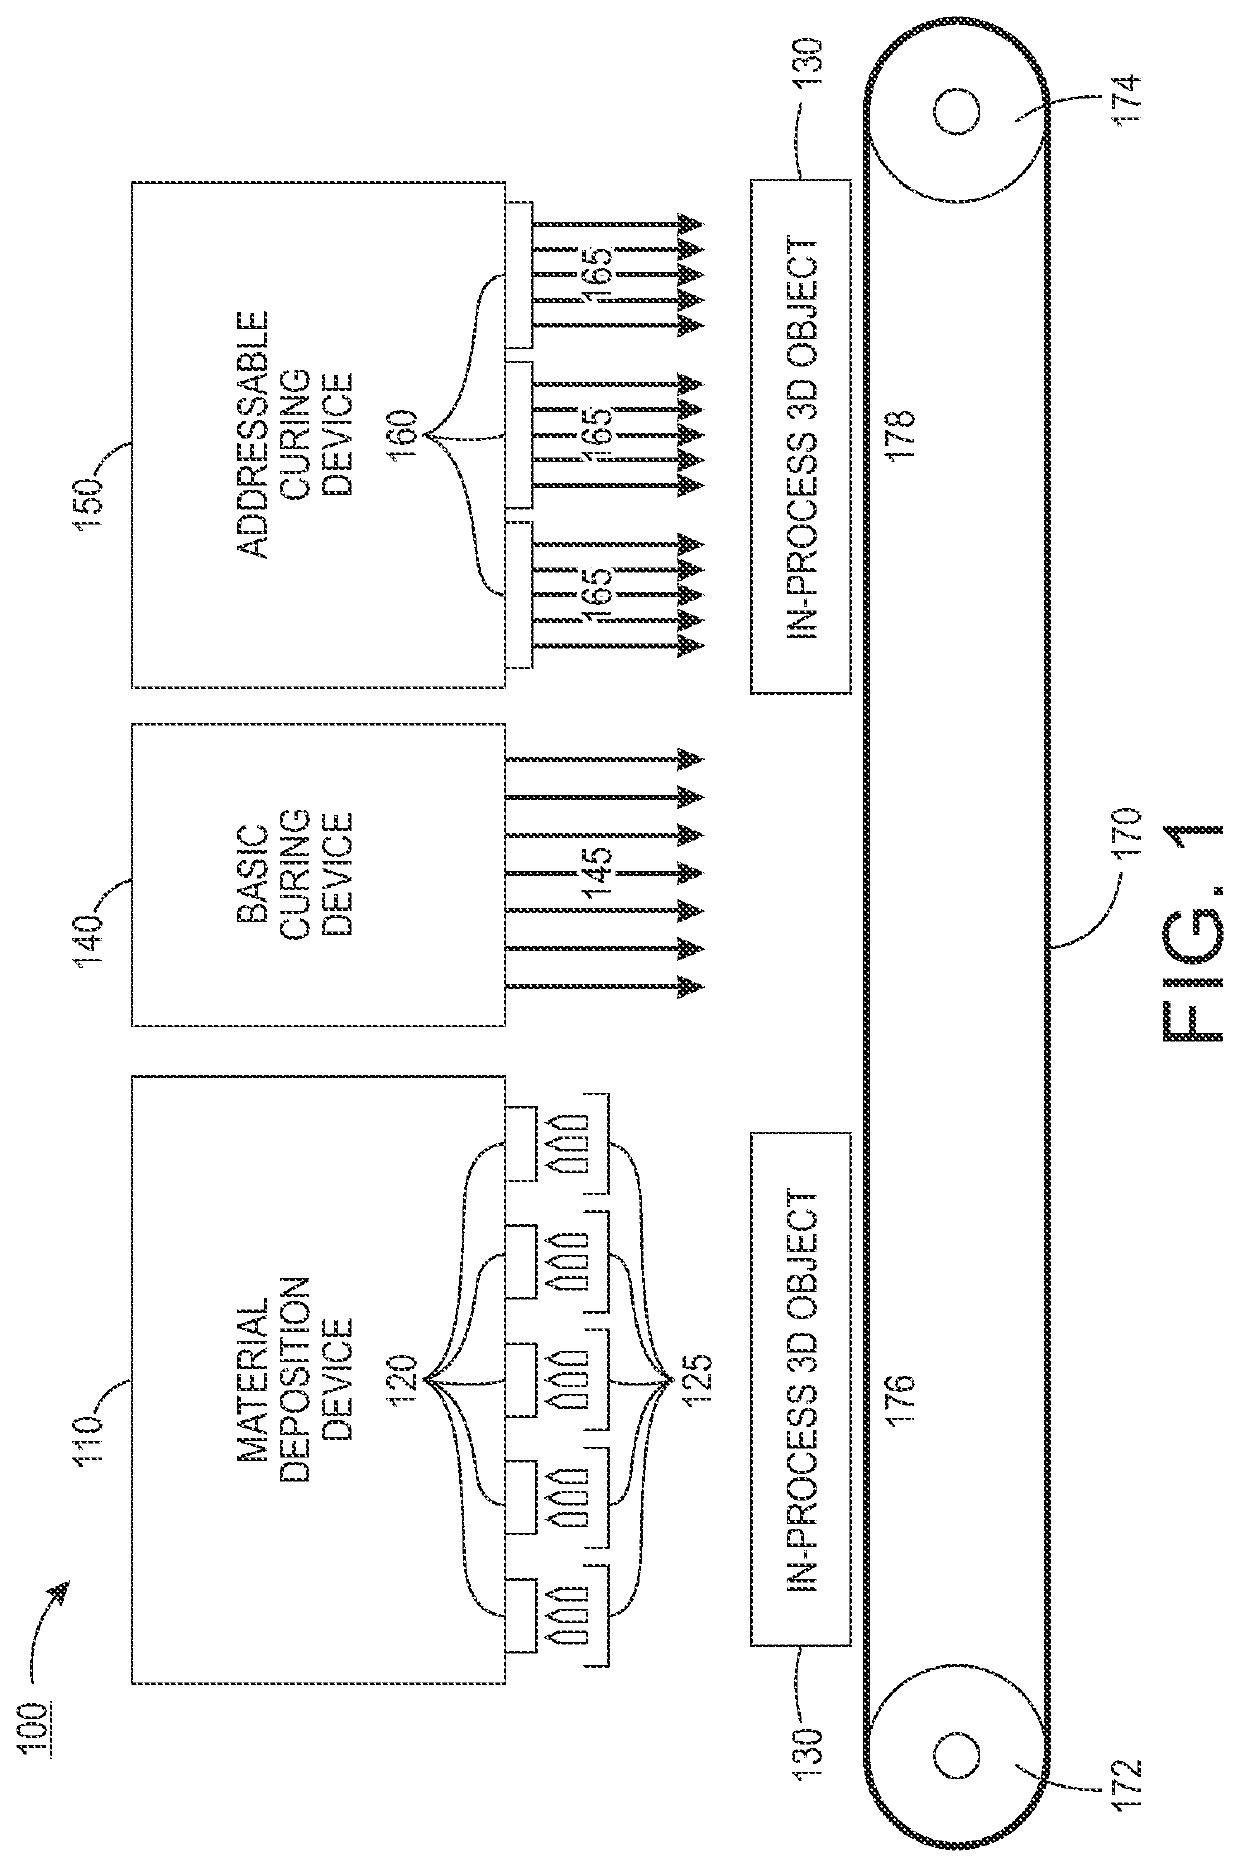 Systems and methods for implementing multi-layer addressable curing of ultraviolet (UV) light curable inks for three dimensional (3D) printed parts and components